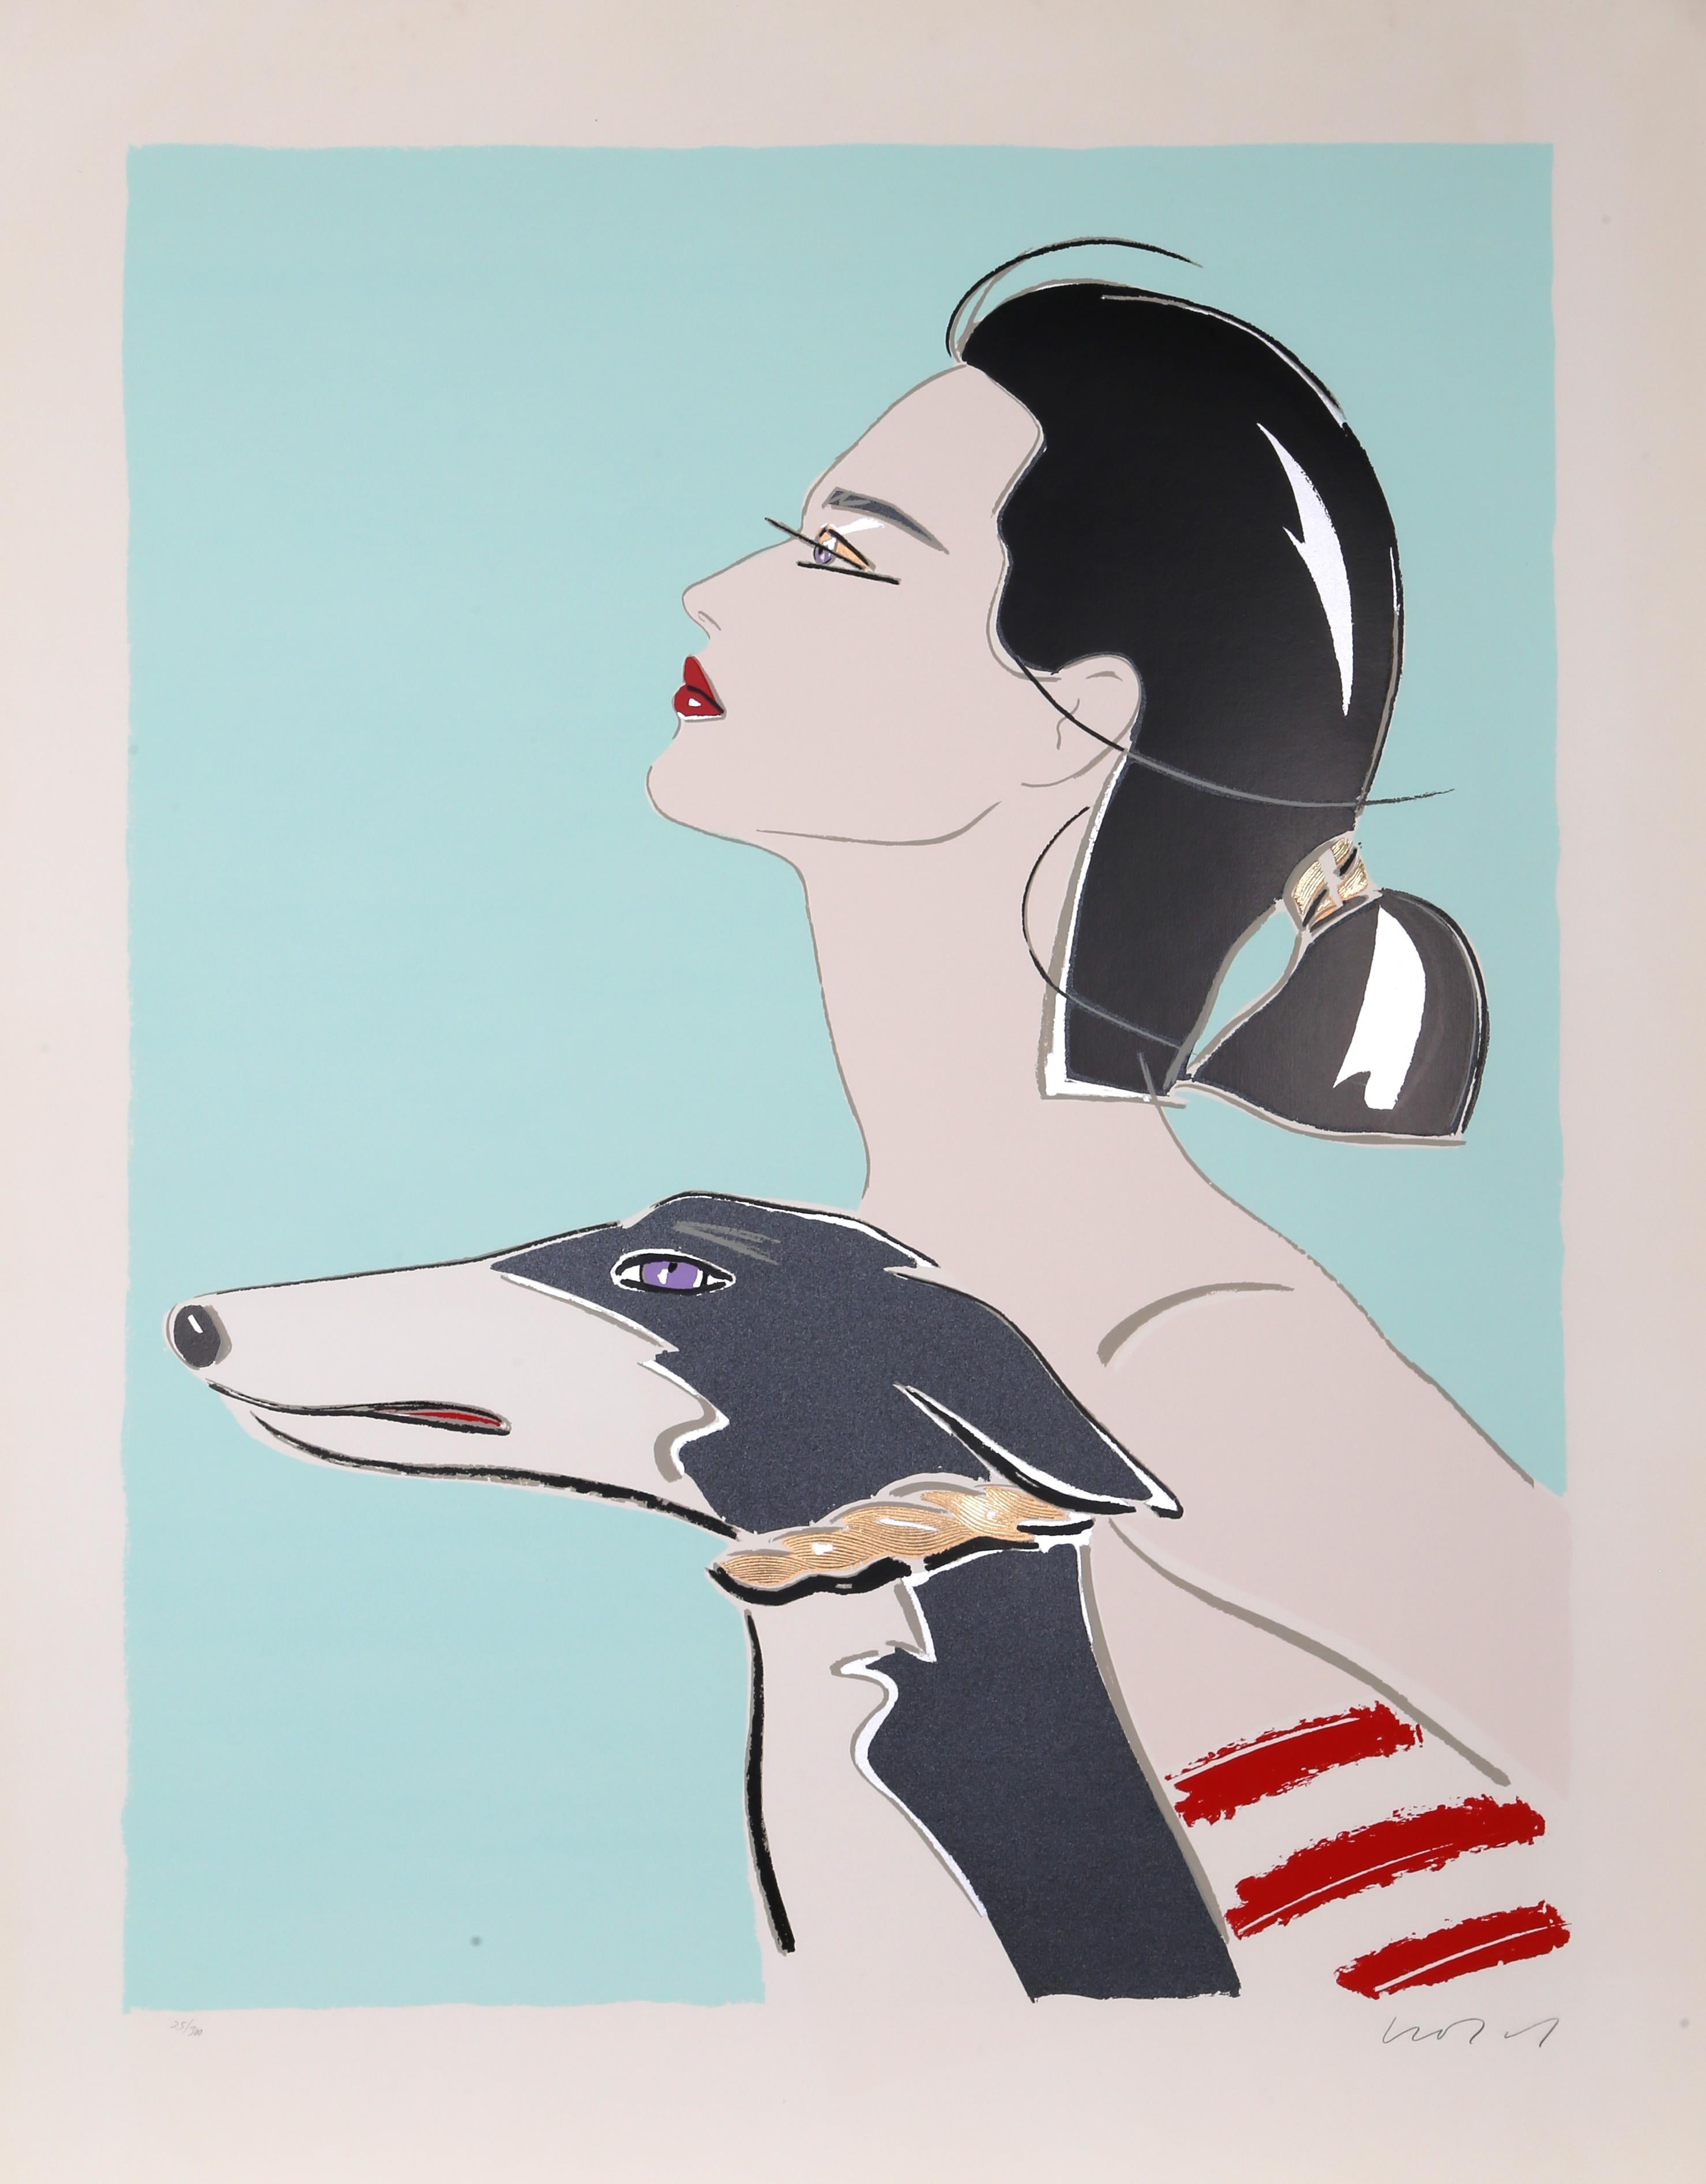 Who is the woman in Patrick Nagel’s art?